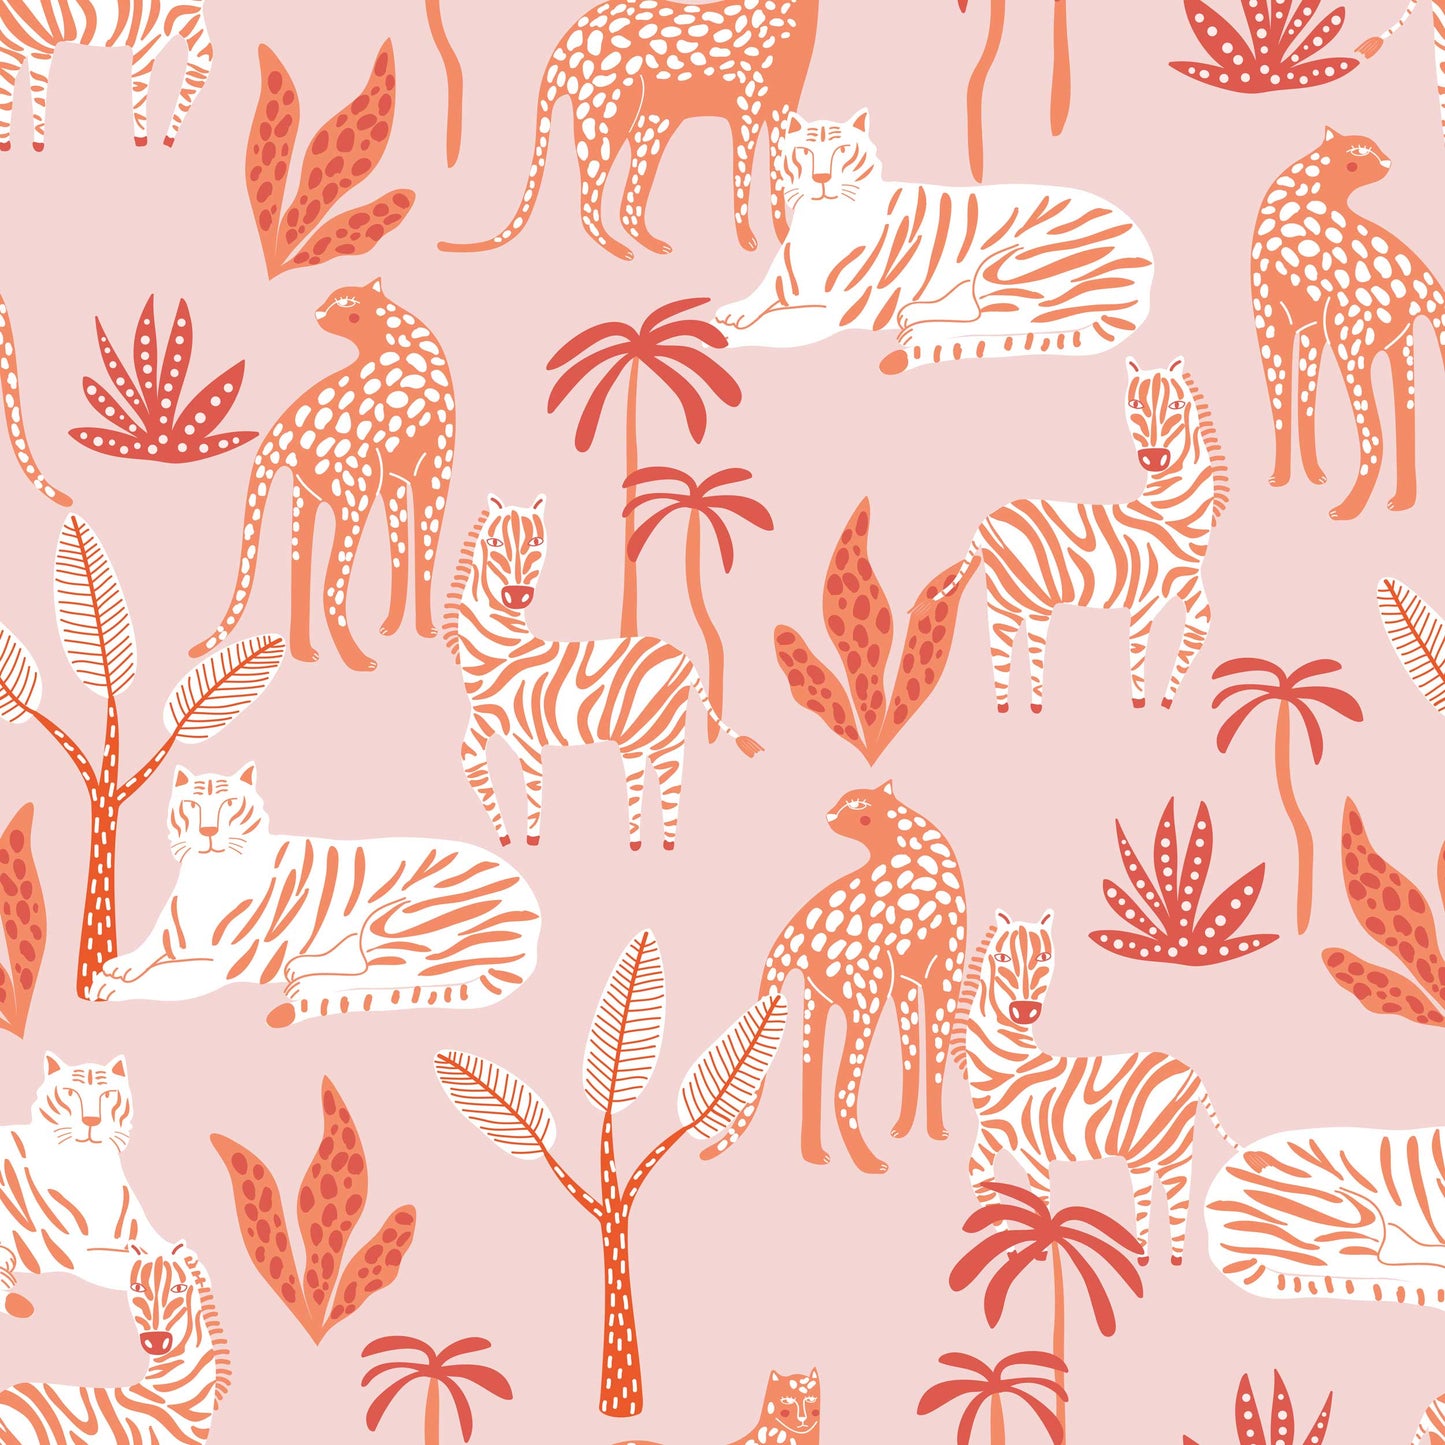 Modern pink safari peel and stick wallpaper featuring playful tigers, leopards, and tropical botanical elements.